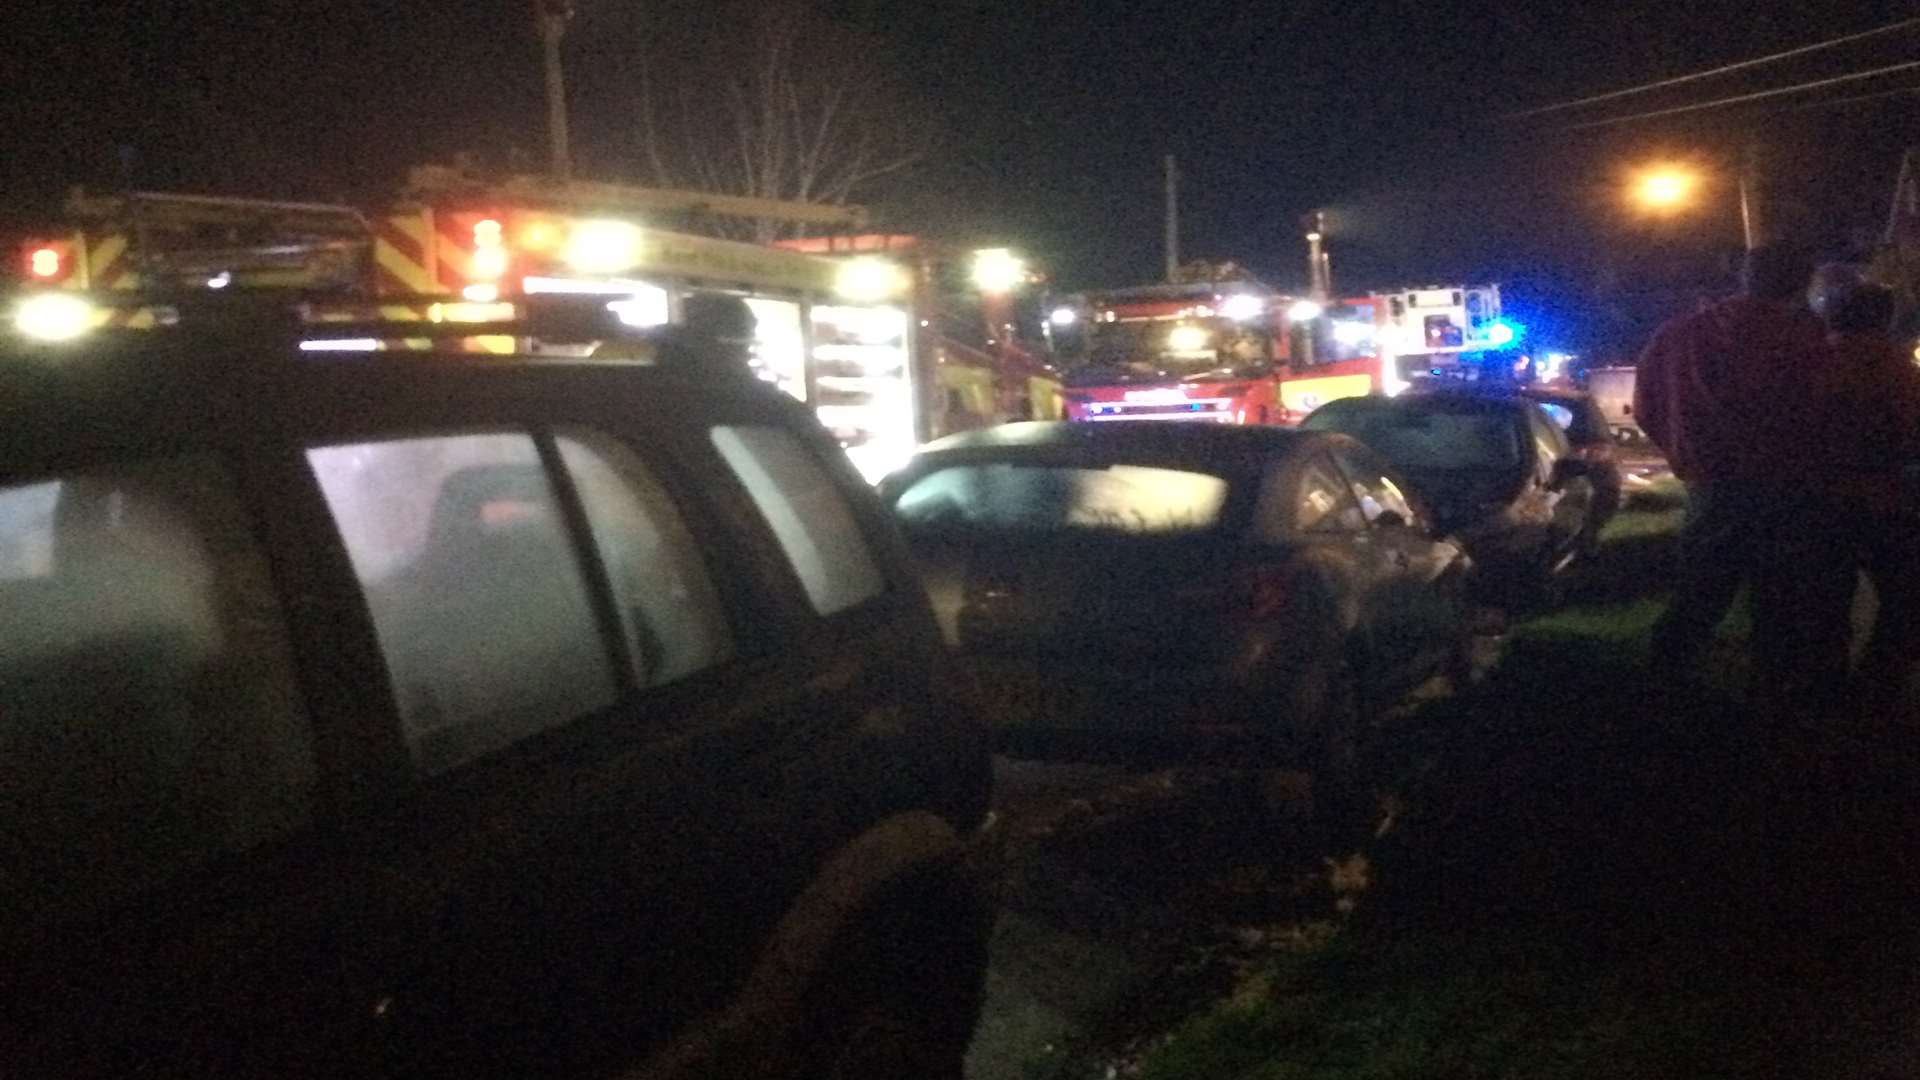 Emergency crews were called out tonight